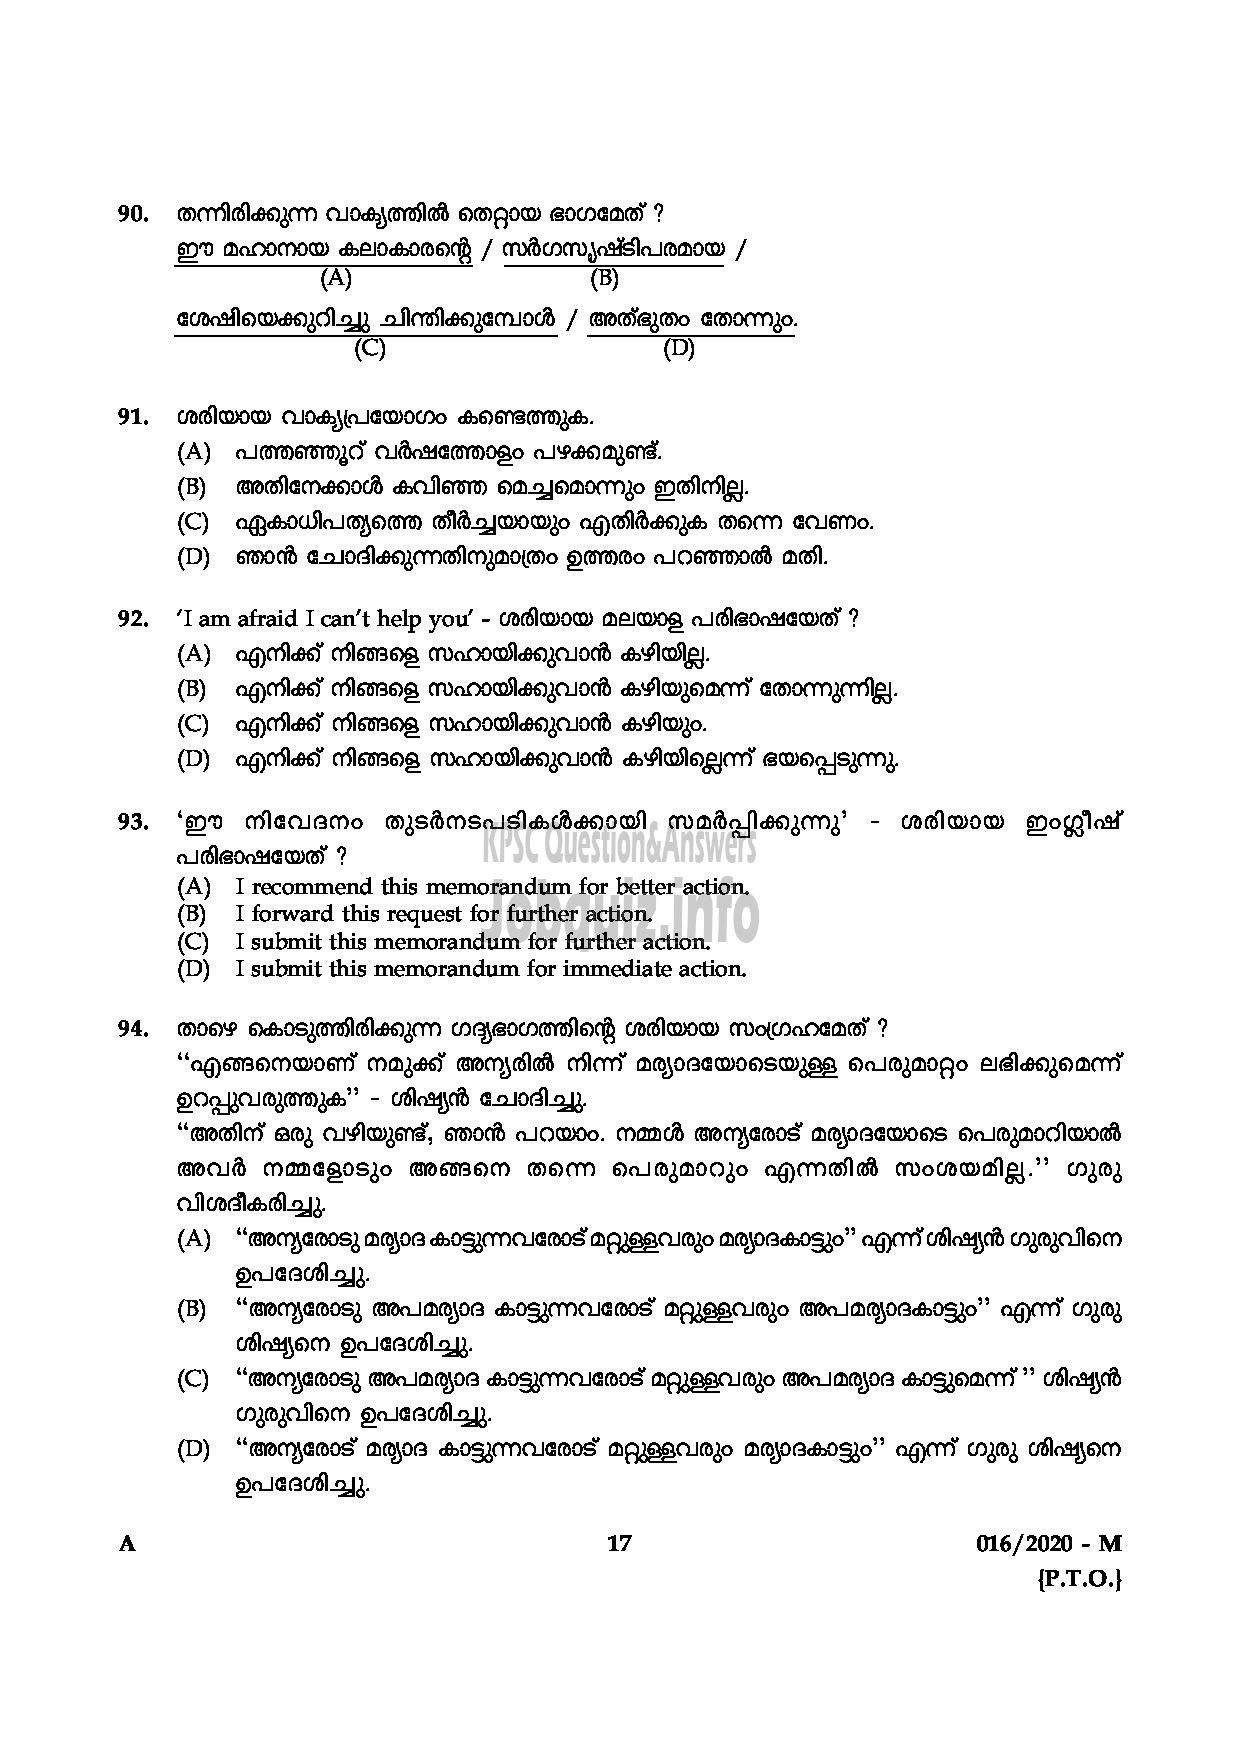 Kerala PSC Question Paper - KAS OFFICER (JUNIOR TIME SCALE) TRAINEE KERALA ADMINISTRATIVE SERVICE-17